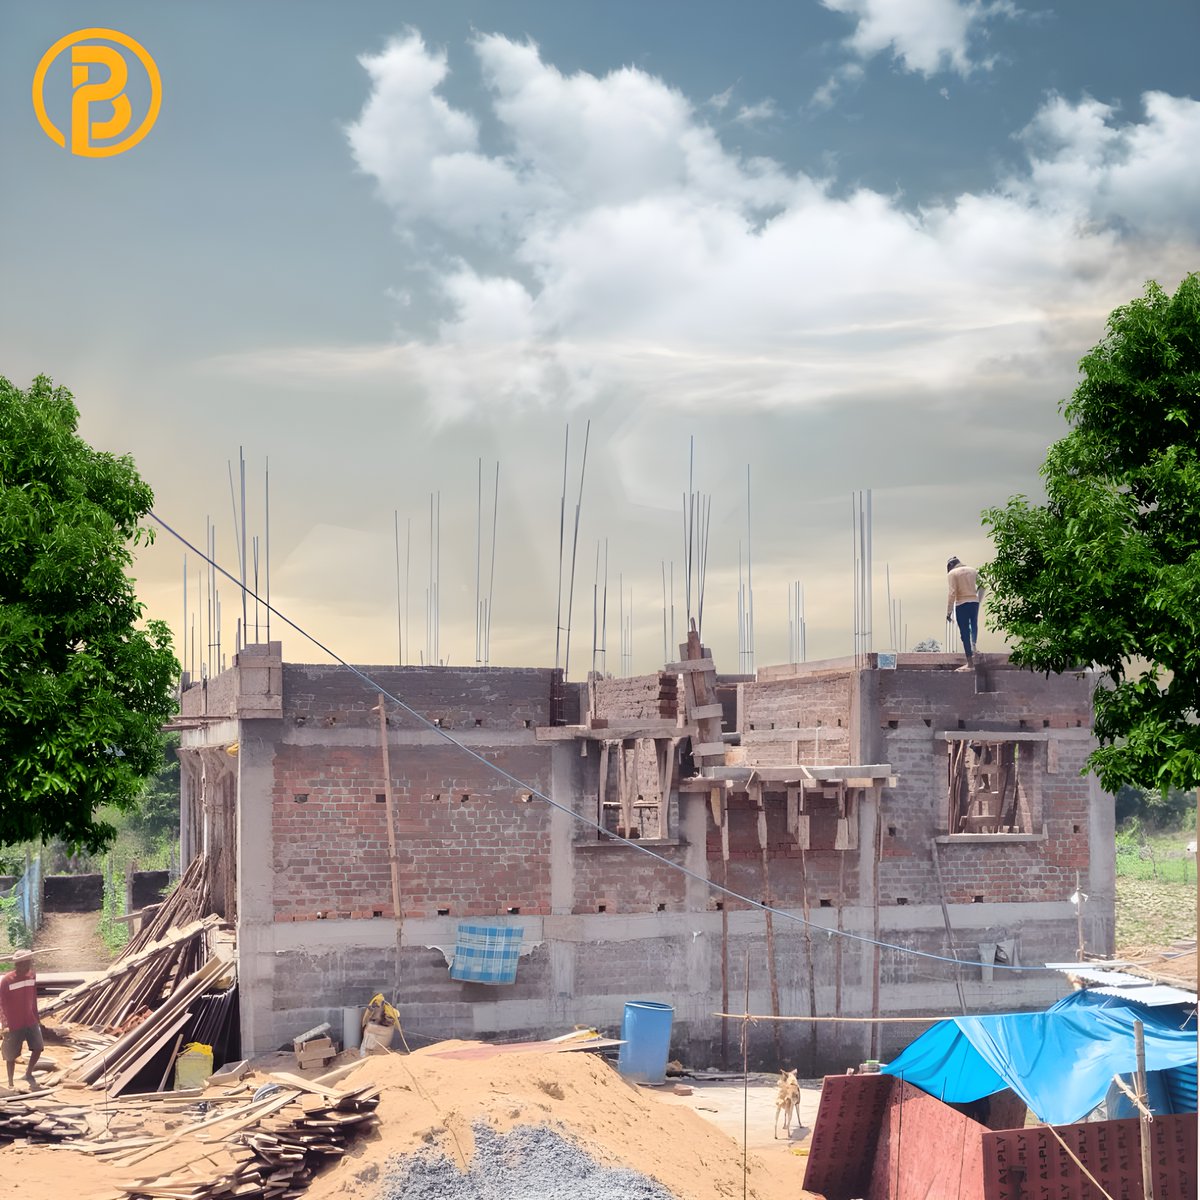 || Our New Construction Site @ Bhubaneswar ||
We always use the best quality materials for the new home construction. We never compromise in quality of materials. Visit us on patrabuilders.com for more information
#newconstructionsite #constructionupdates #bestquality